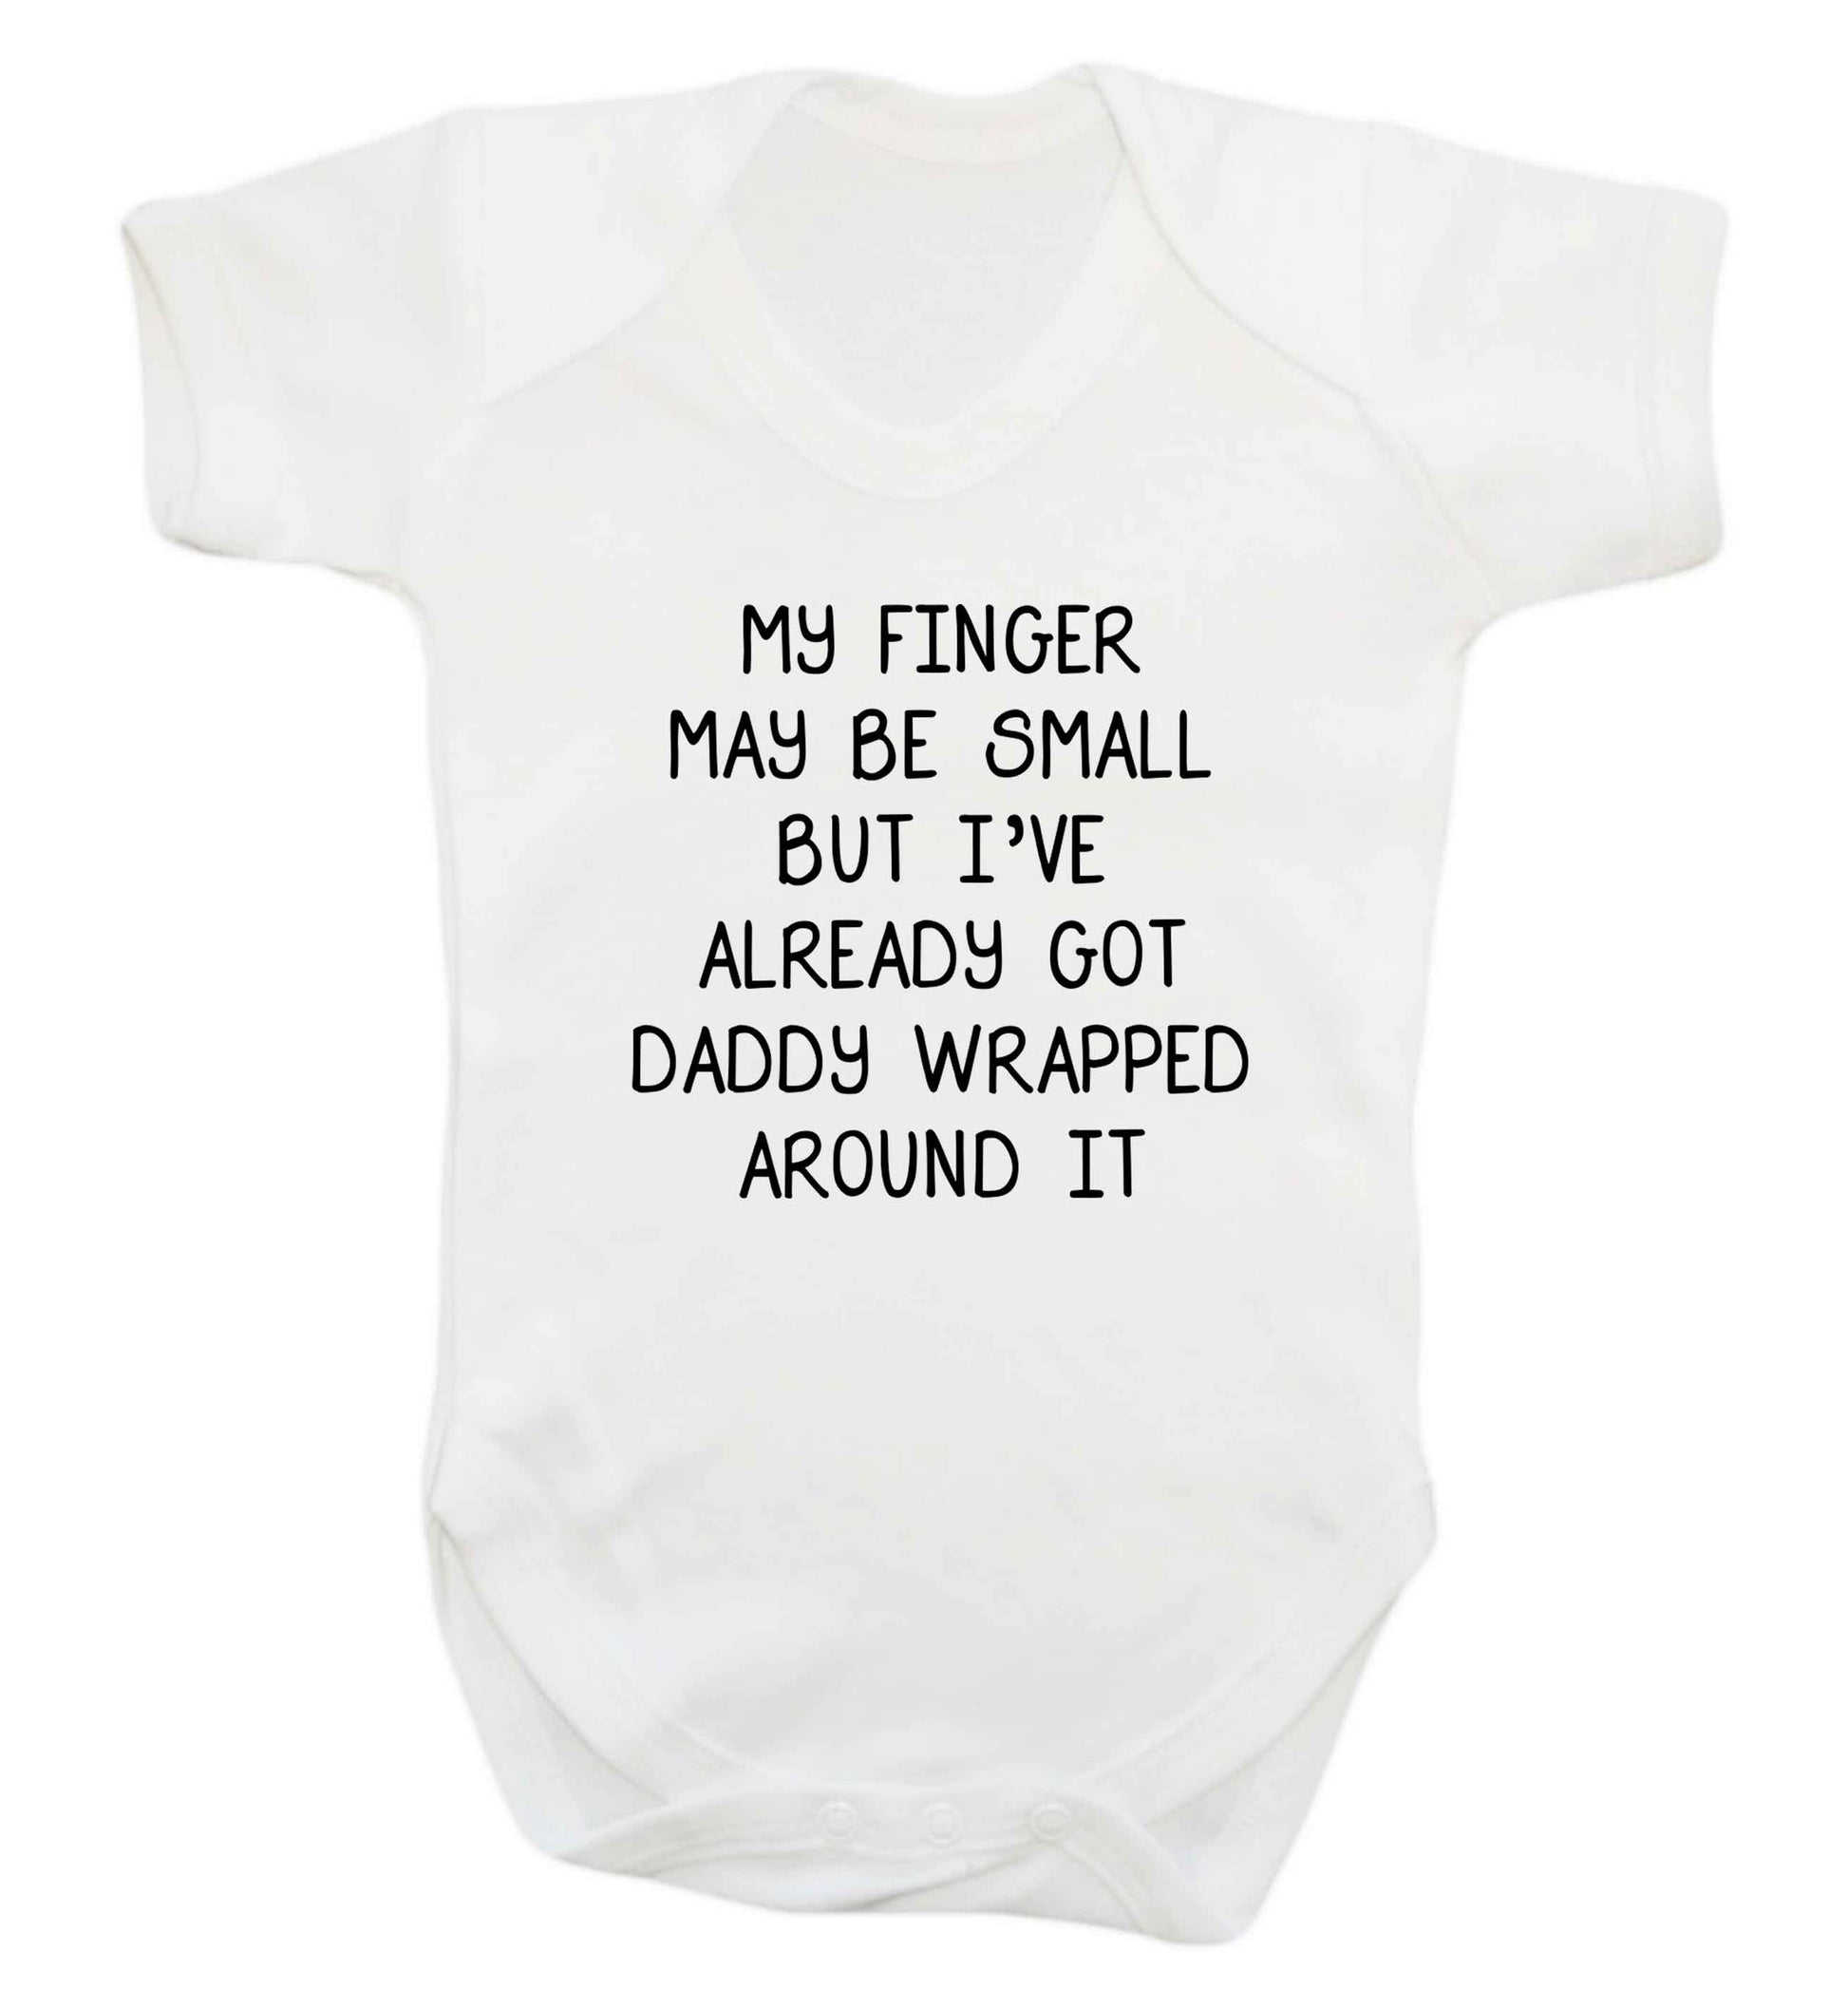 My finger may be small but I've already got daddy wrapped around it baby vest white 18-24 months